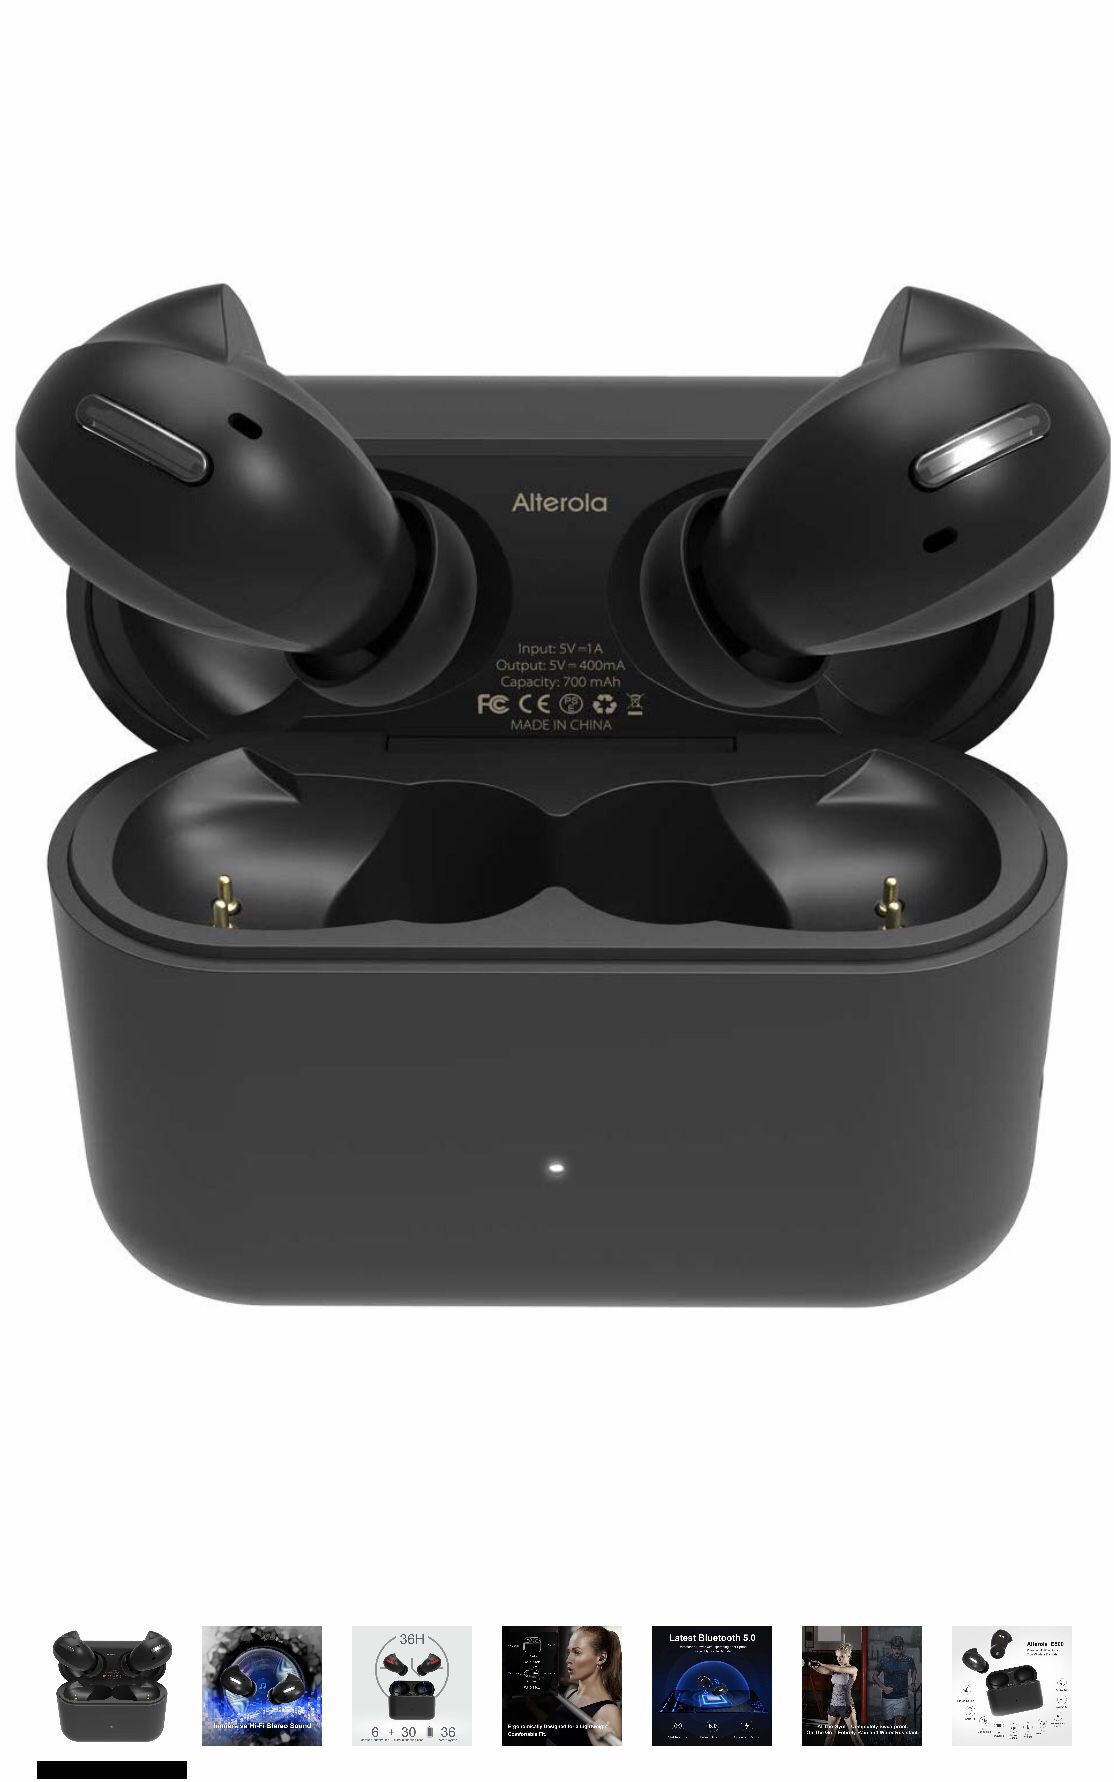 Wireless Earbuds, Alterola IE800 Bluetooth 5.0 True Wireless Earbuds AUTO Stable Pairing with 36 Playtime CVC Noise Cancelling Stereo Hi-Fi Sound, Wa